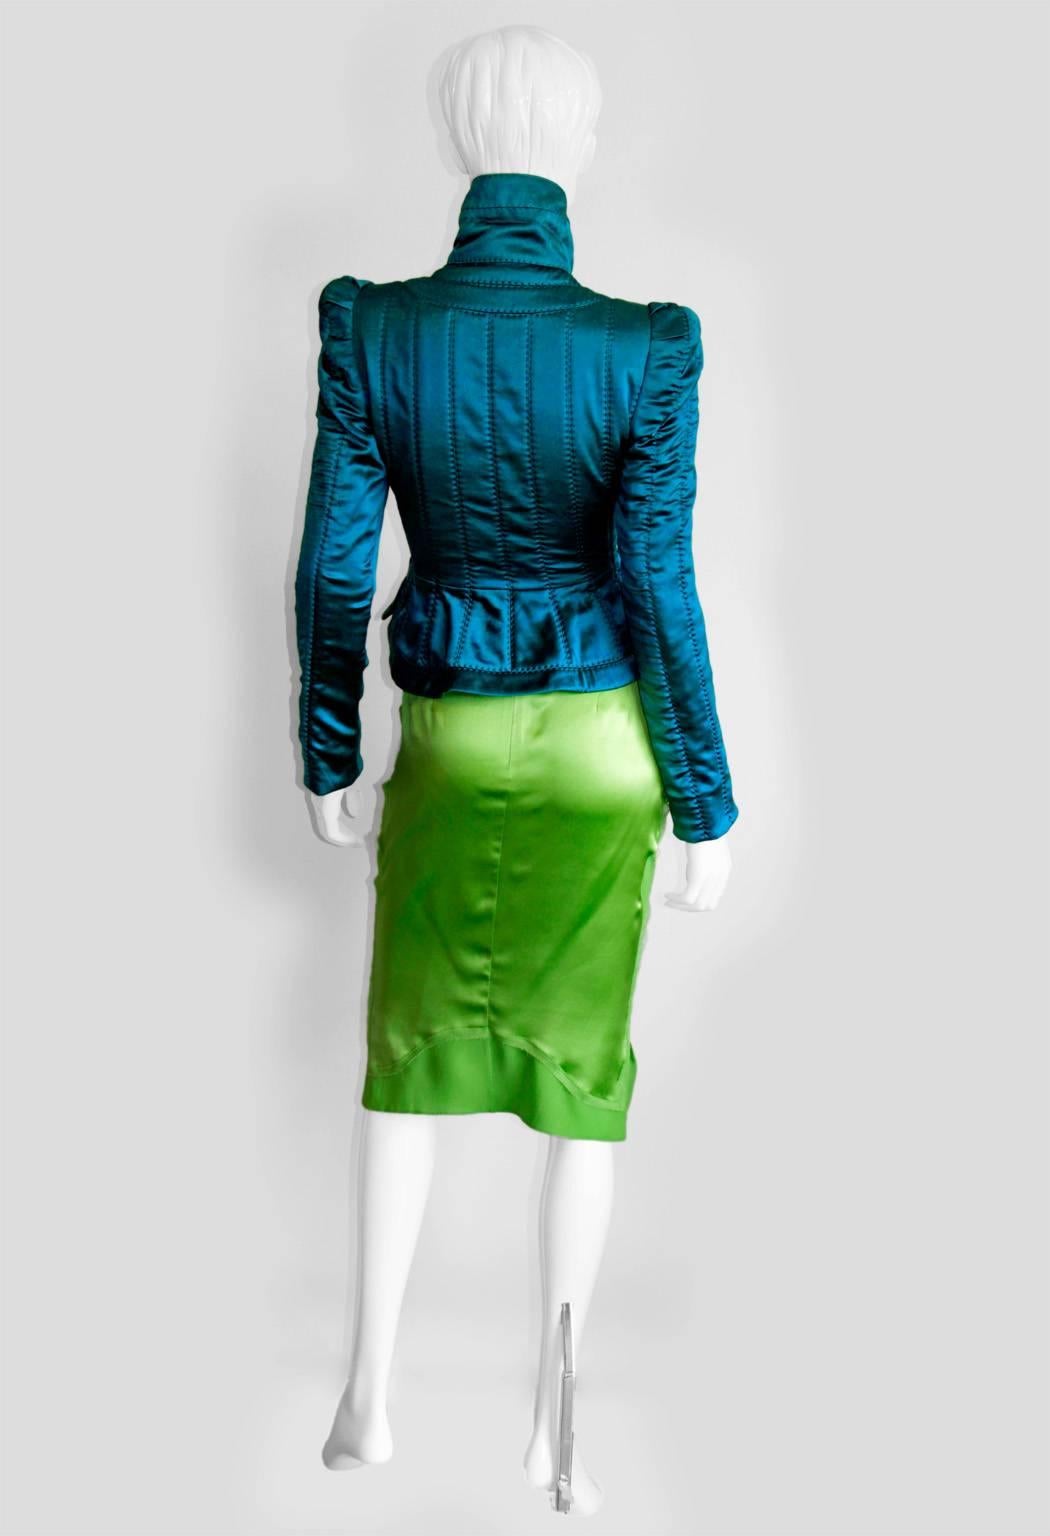 That Heavenly Tom Ford YSL Rive Gauche FW 2004 Green Chinoiserie Jacket & Skirt In Excellent Condition For Sale In Melbourne, AU